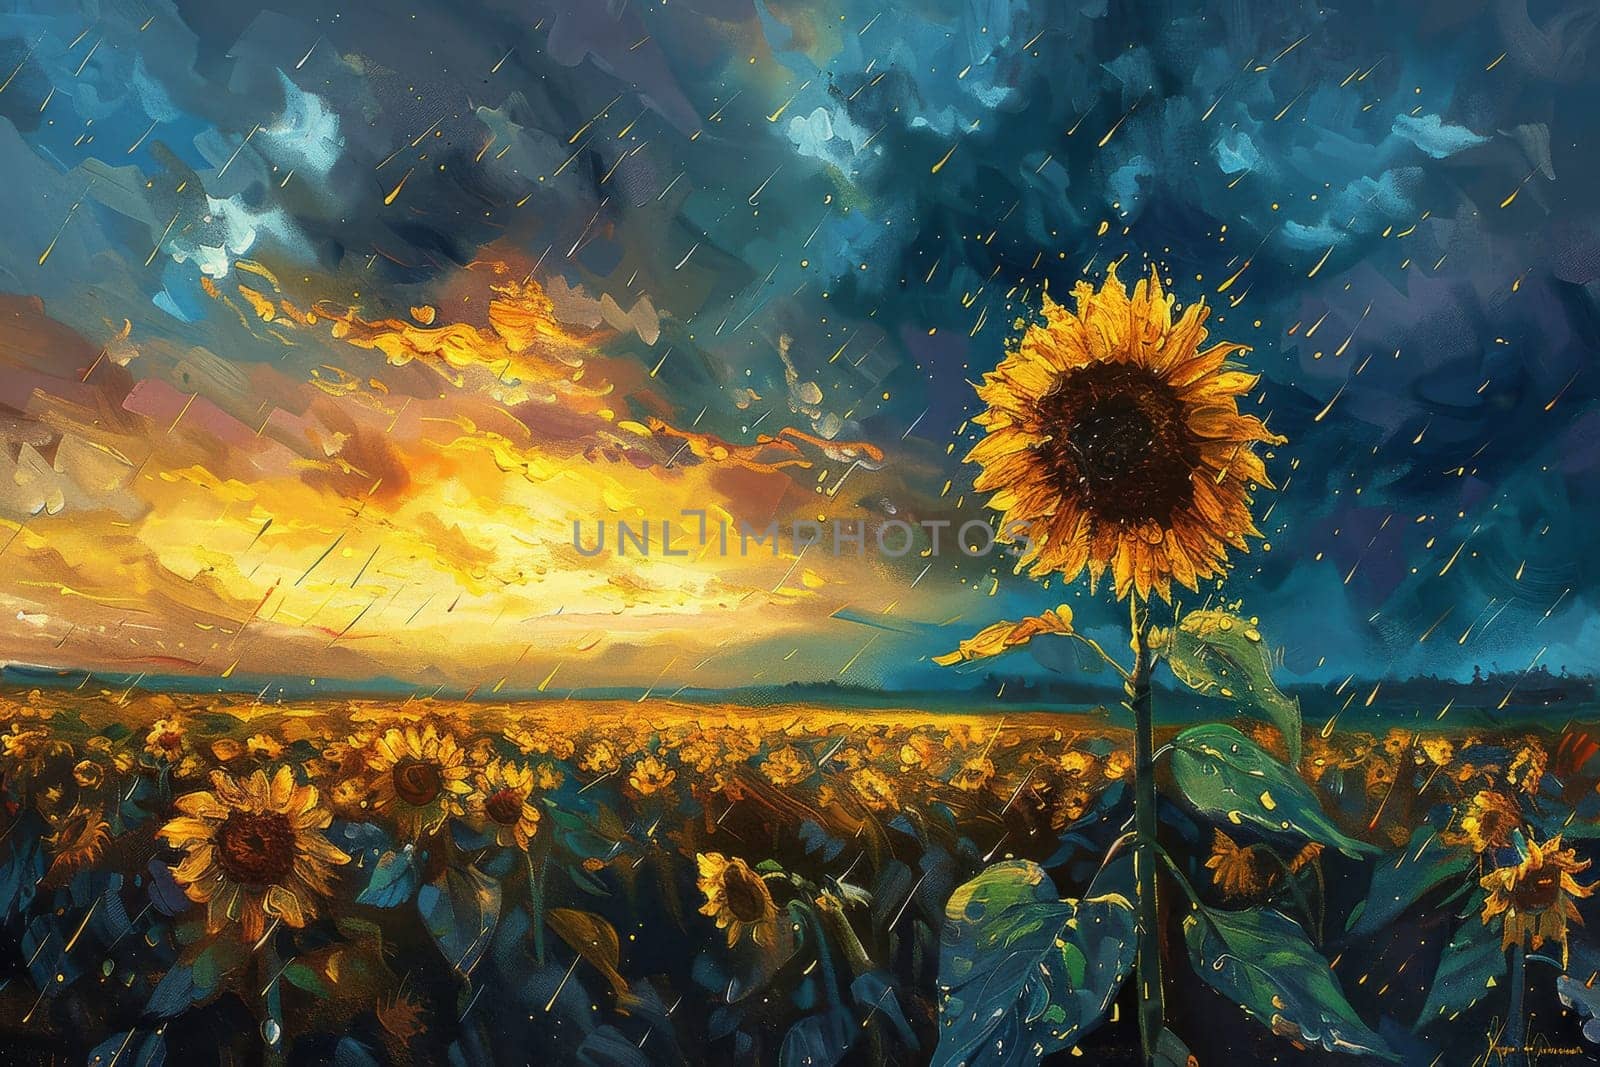 A painting of a field of sunflowers with a cloudy sky in the background. The painting conveys a sense of tranquility and beauty, as the sunflowers are the main focus